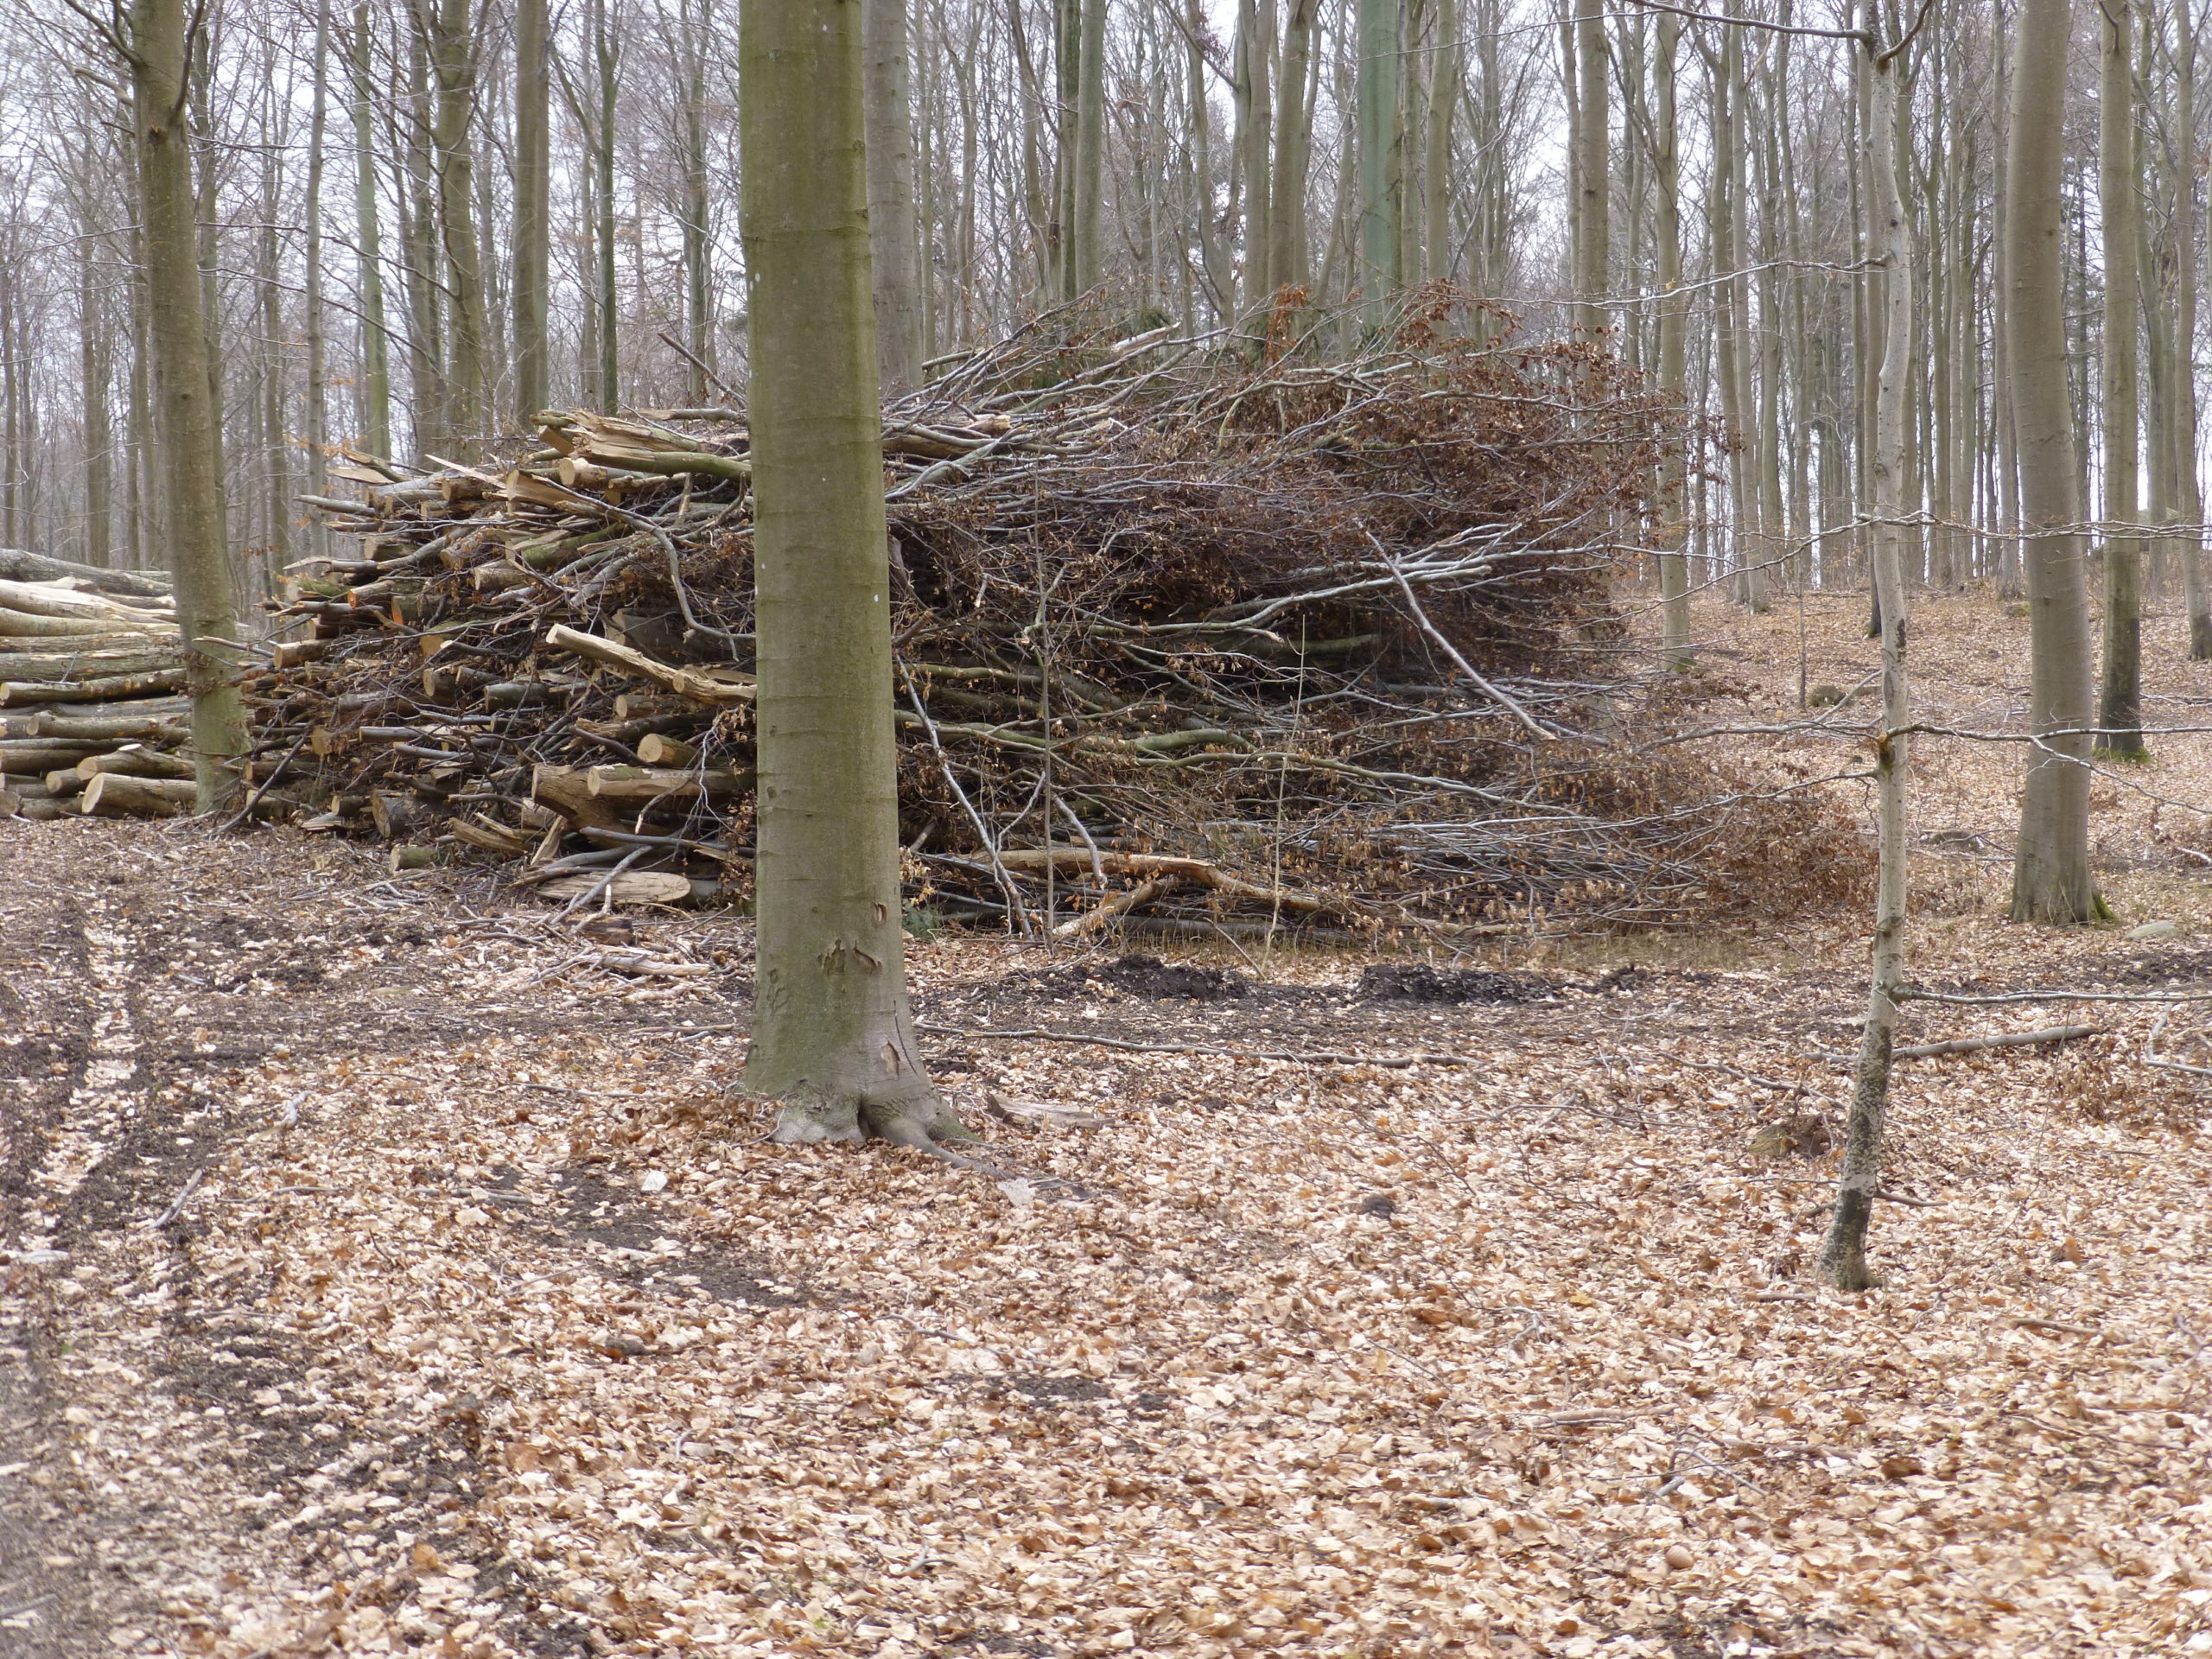 A pile of logs in the middle of a forest